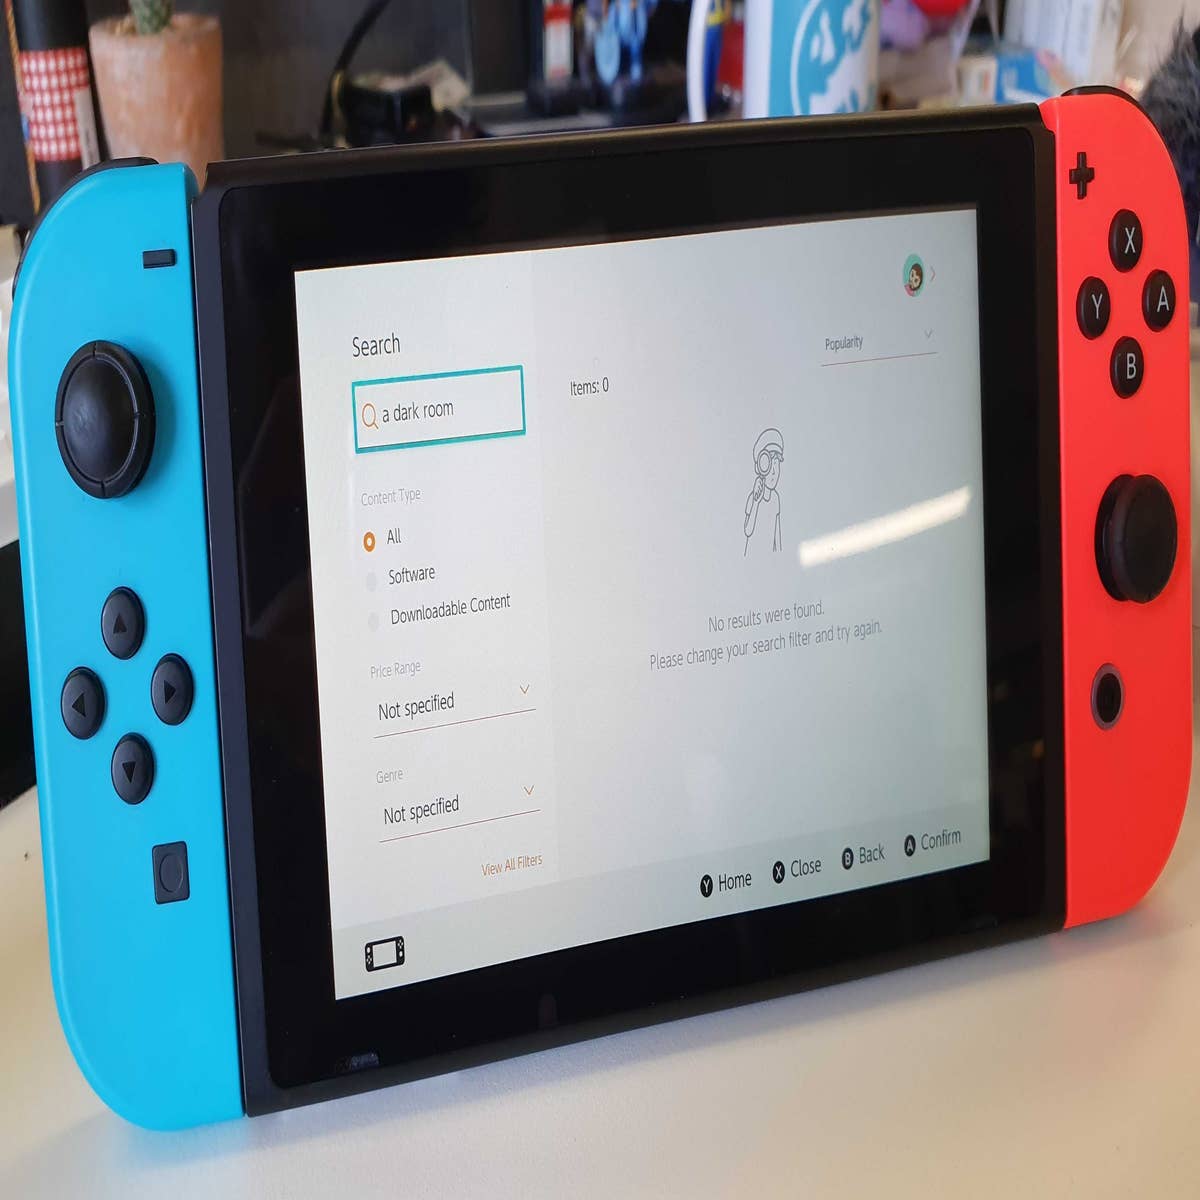 This Exploit Lets You View 3DS And Wii U Games On The Switch eShop